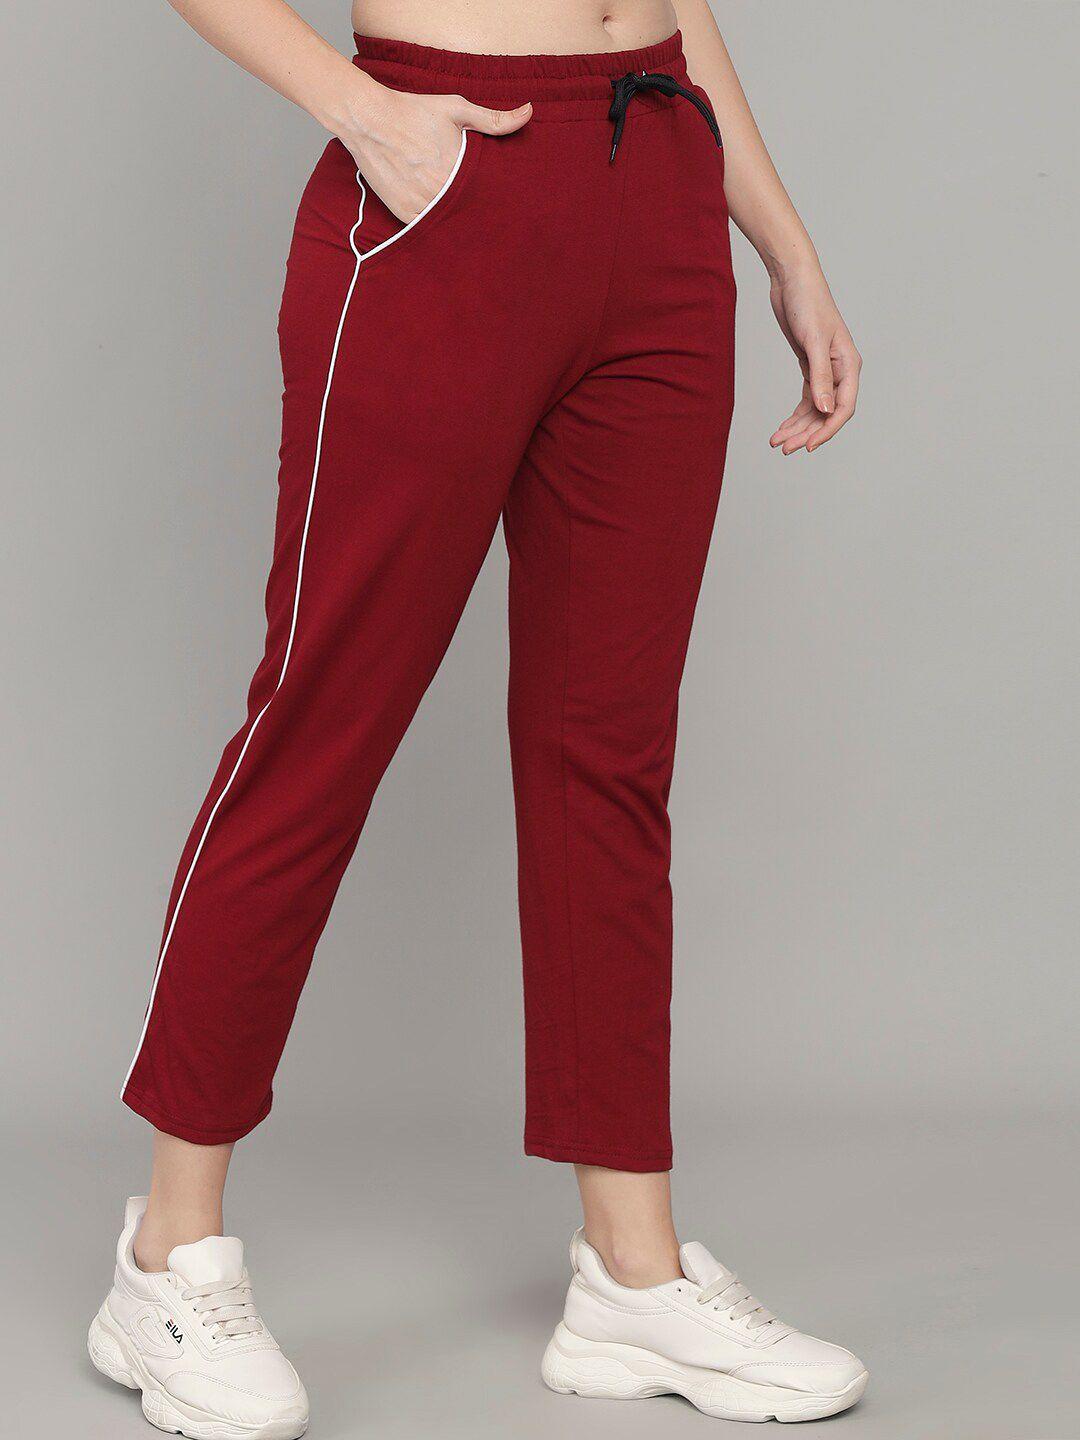 q-rious women maroon red solid cotton track pants